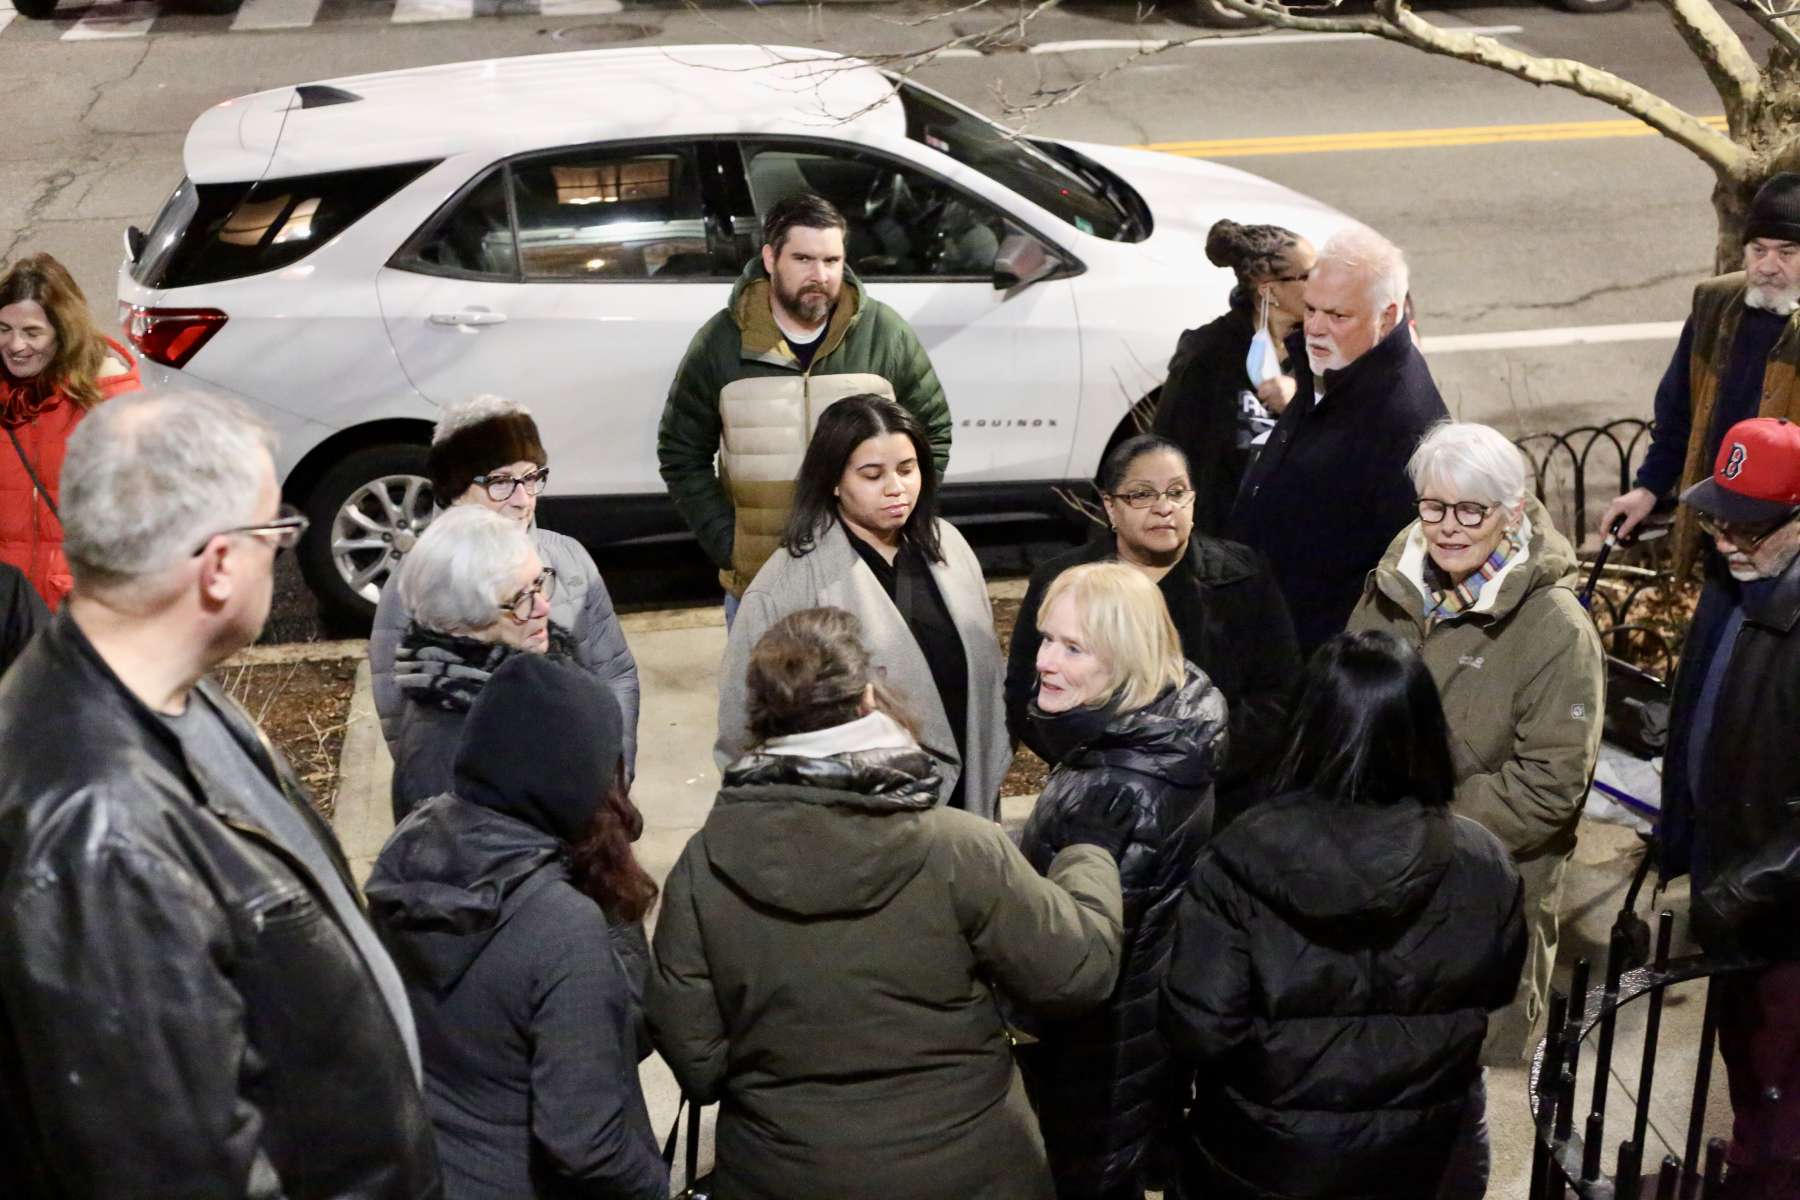 Rhode Island News: Exclusive: Outside ‘meeting to plan a meeting’ West End residents voice concern over warming center